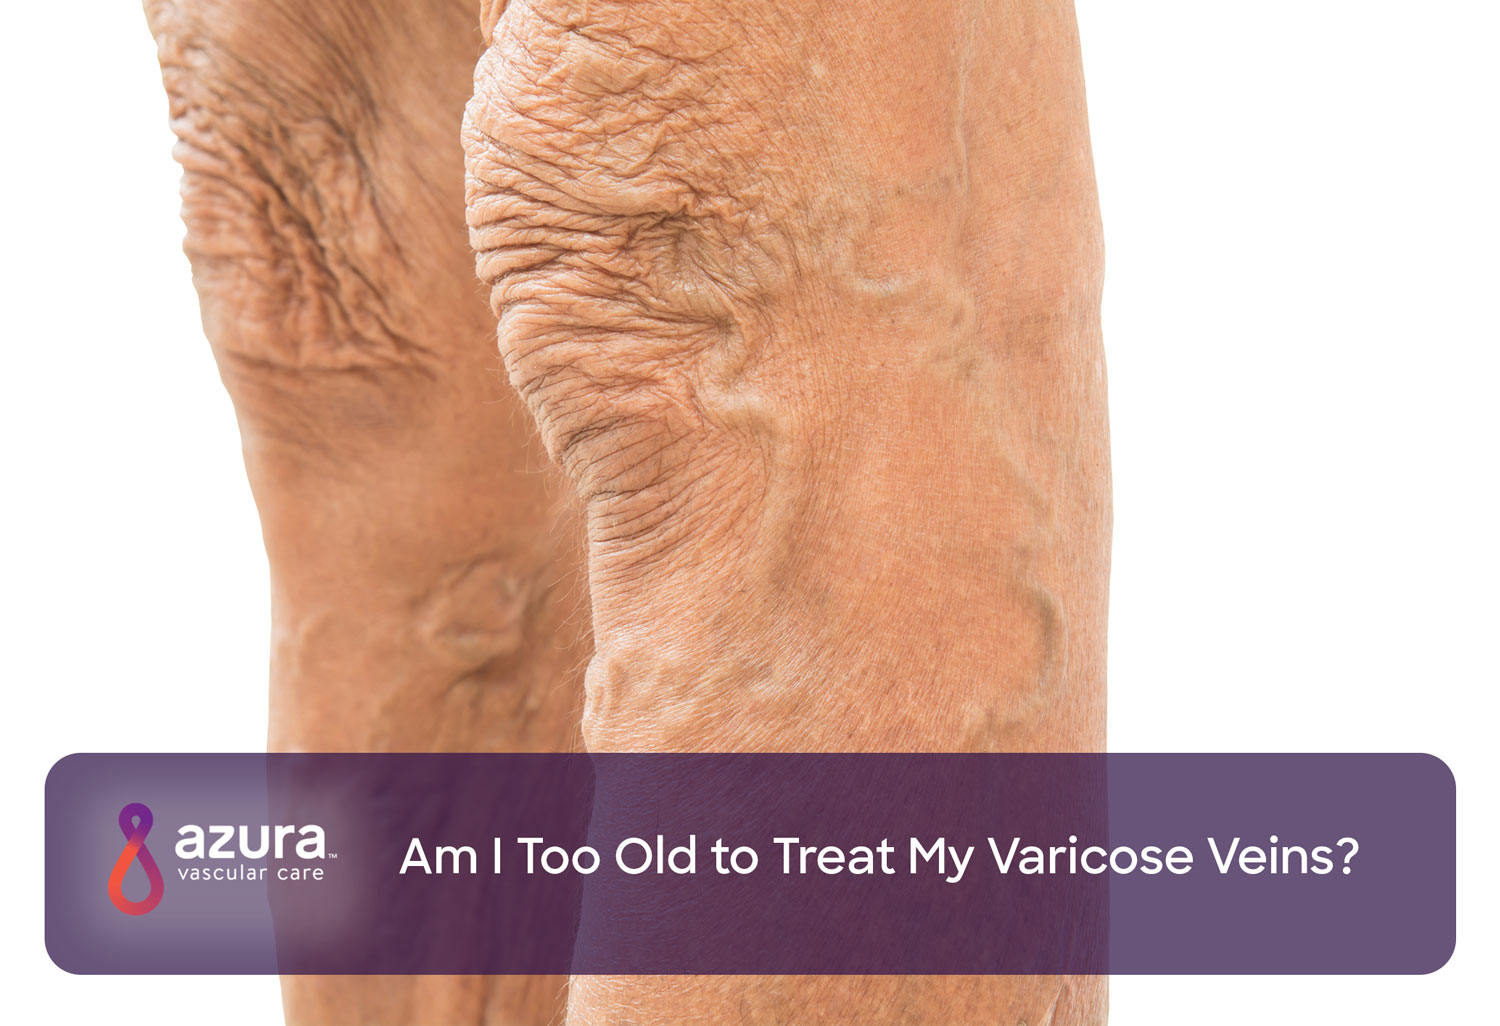 https://www.azuravascularcare.com//assets/Am-I-Too-Old-to-Treat-My-Varicose-Veins.jpg